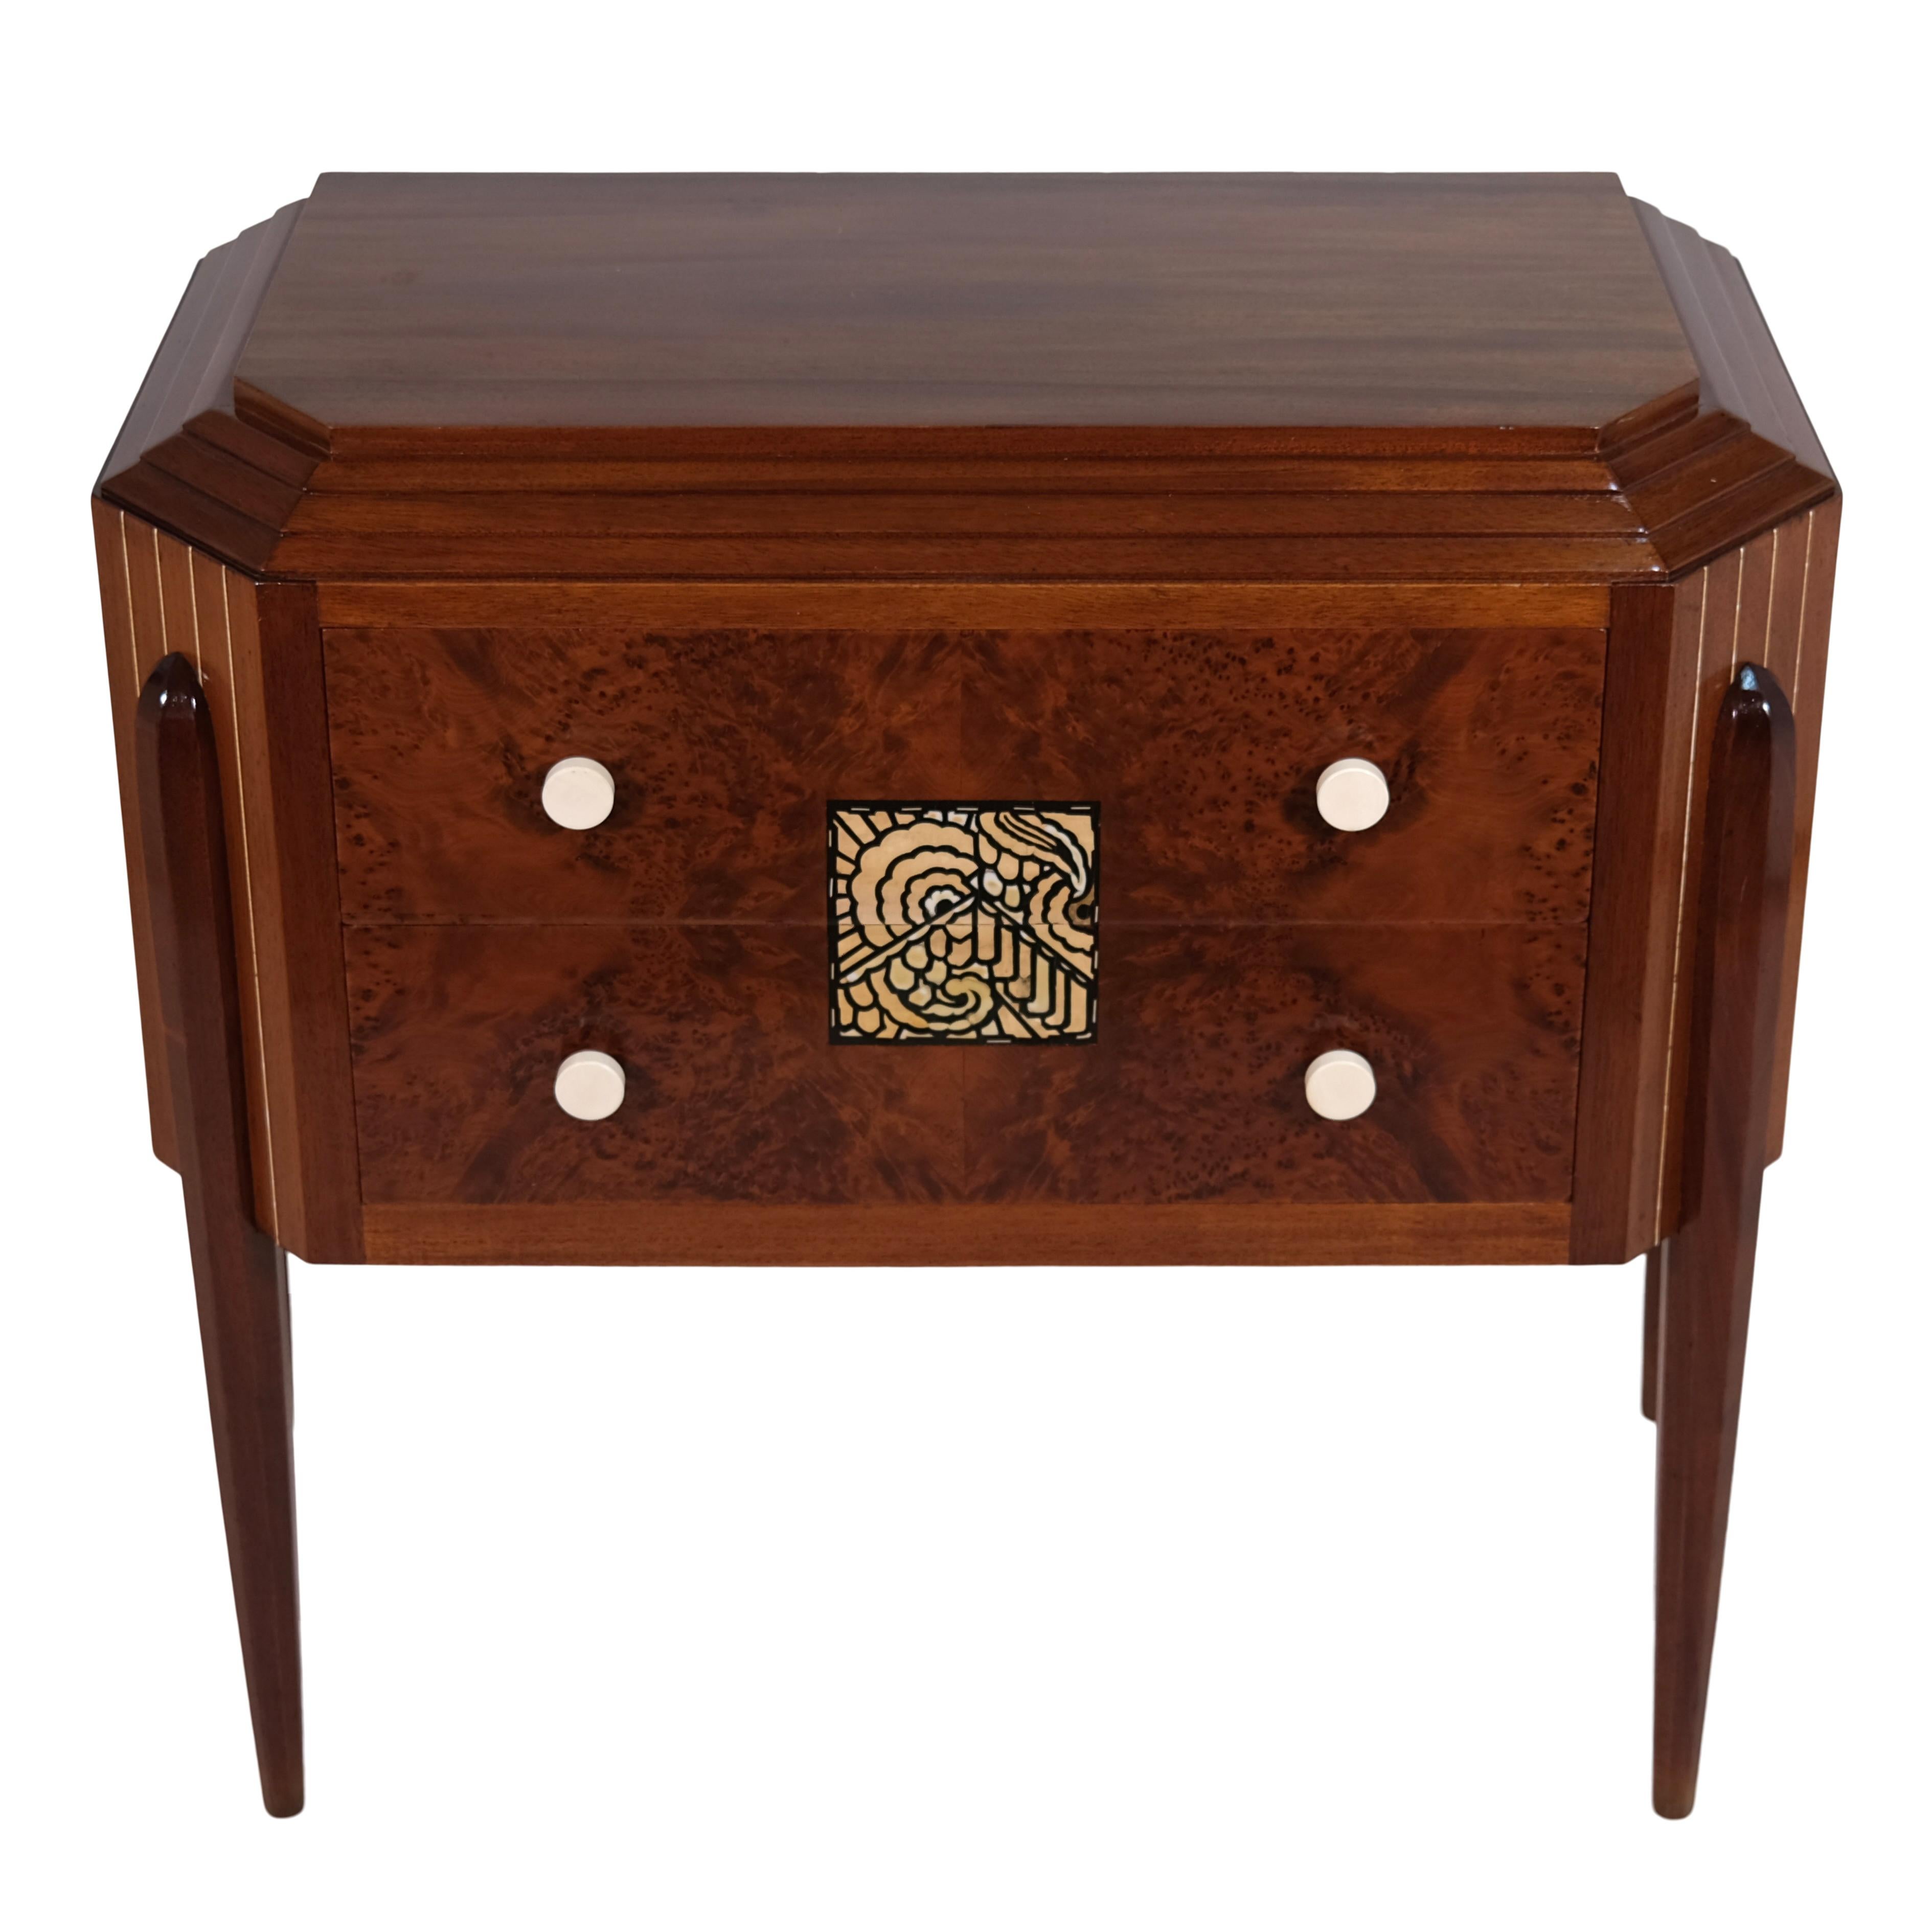 Discover the timeless elegance and artisanal refinement of this original Art Deco chest of drawers from France, dating back to around 1925. Every detail has been carefully crafted to bring a touch of luxury to your home.

The body of this chest of